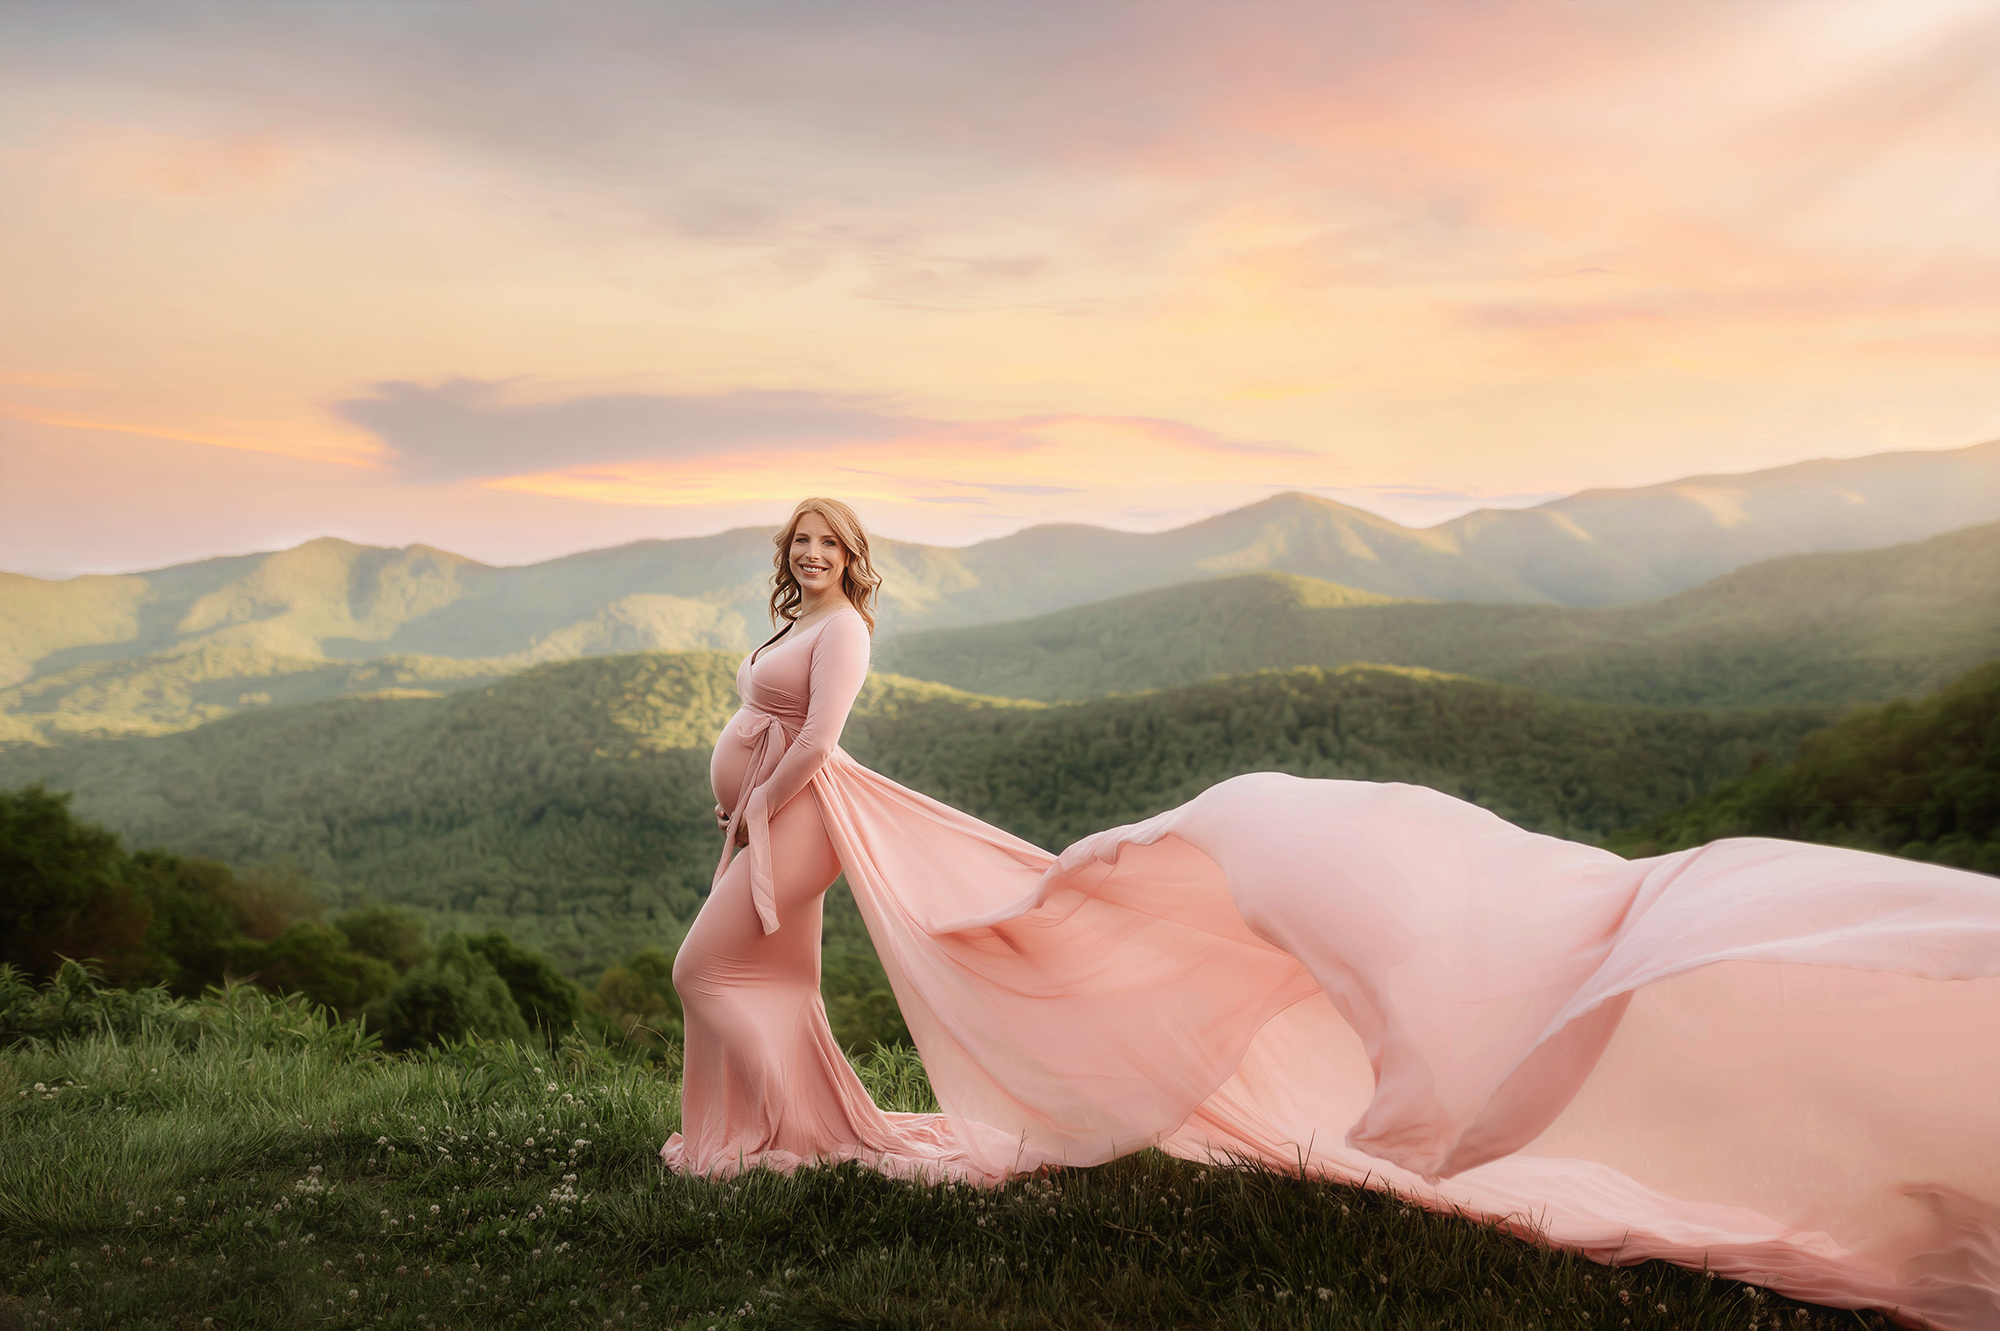 Expectant mother poses for Maternity Photos on the Blue Ridge Parkway in Asheville, NC.